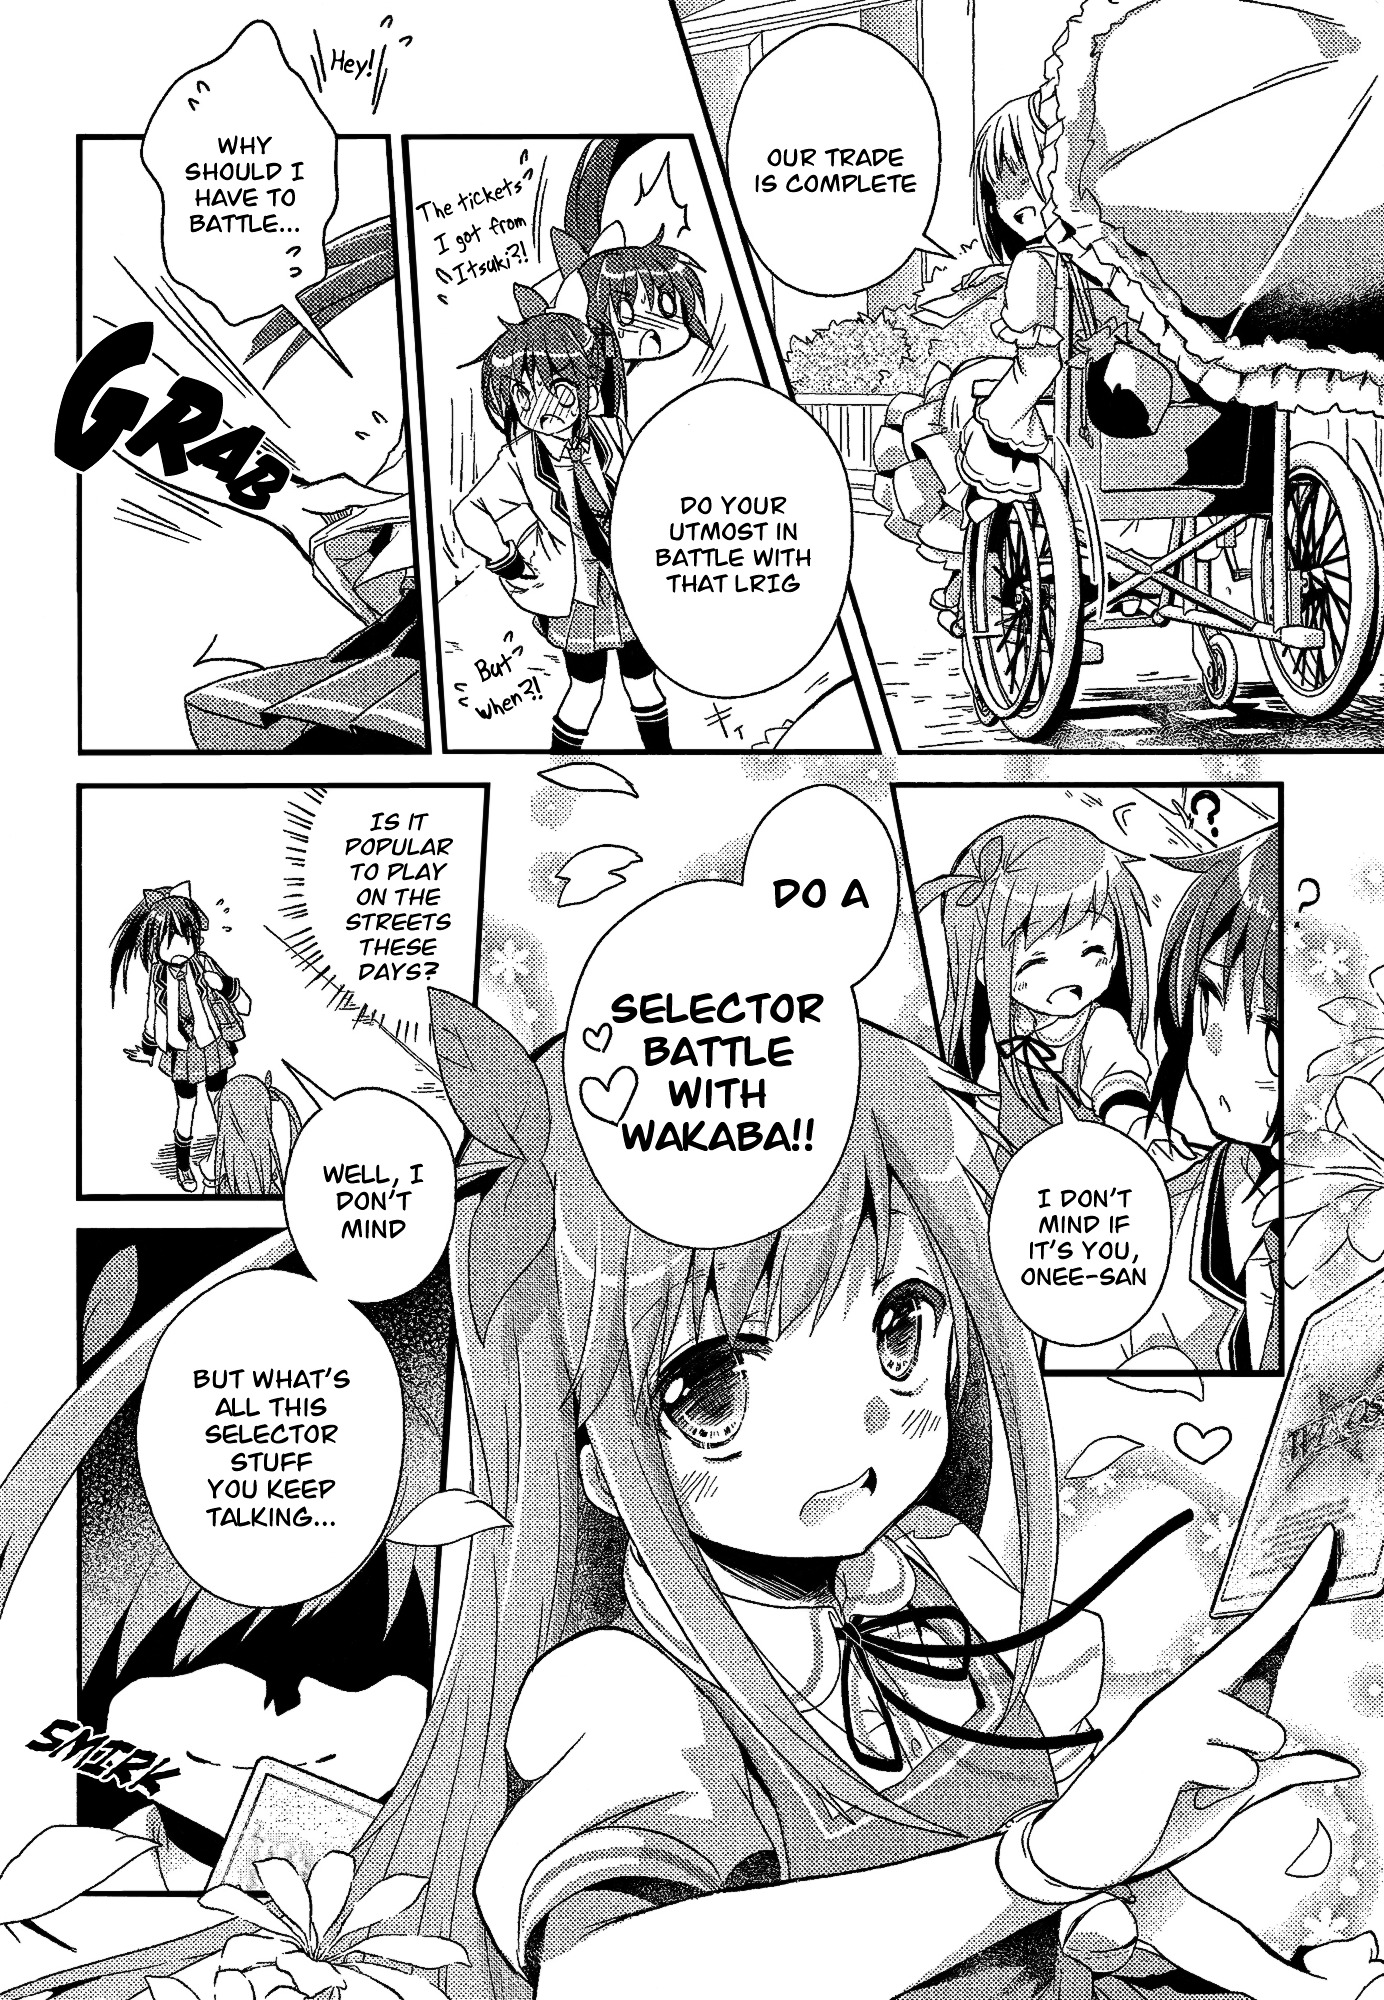 Selector Infected Wixoss - Re/verse - Chapter 1 #25